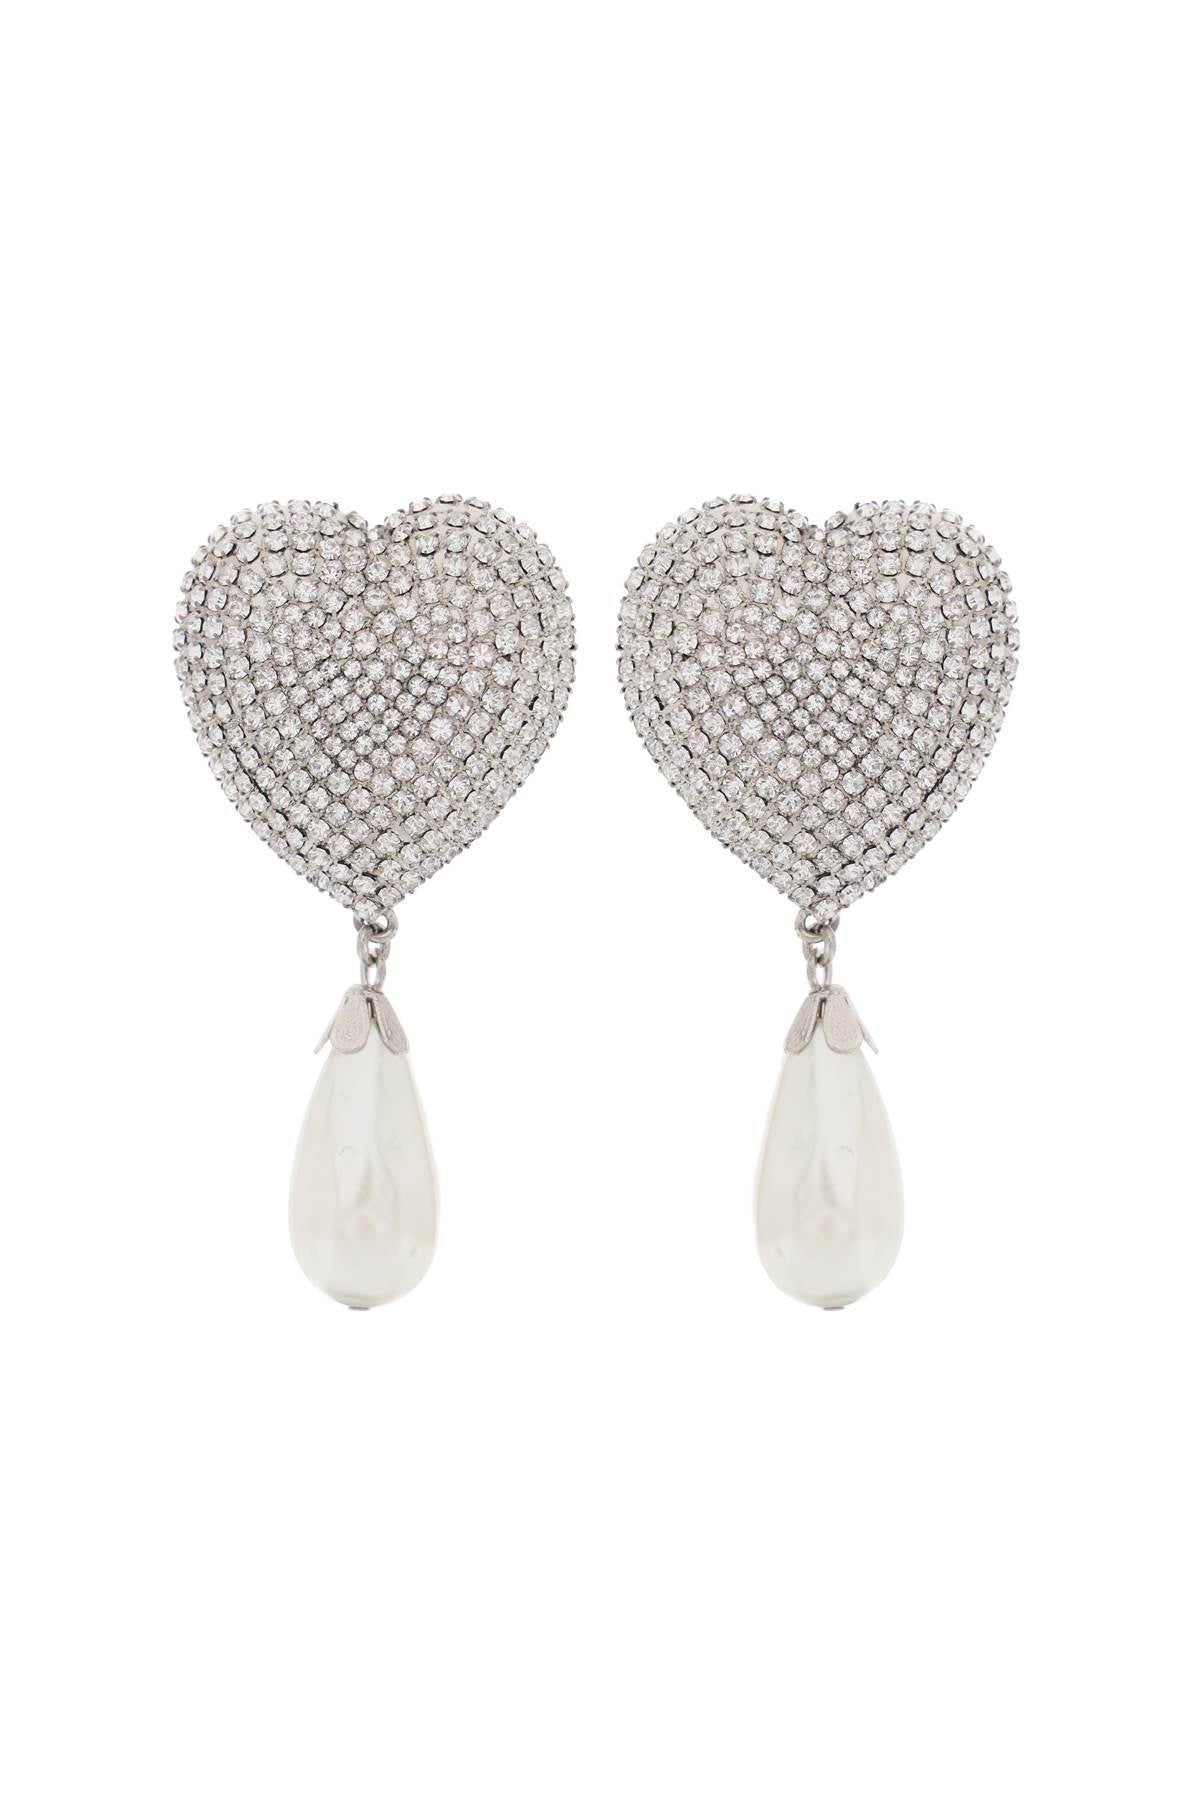 Alessandra rich heart crystal earrings with pearls-1